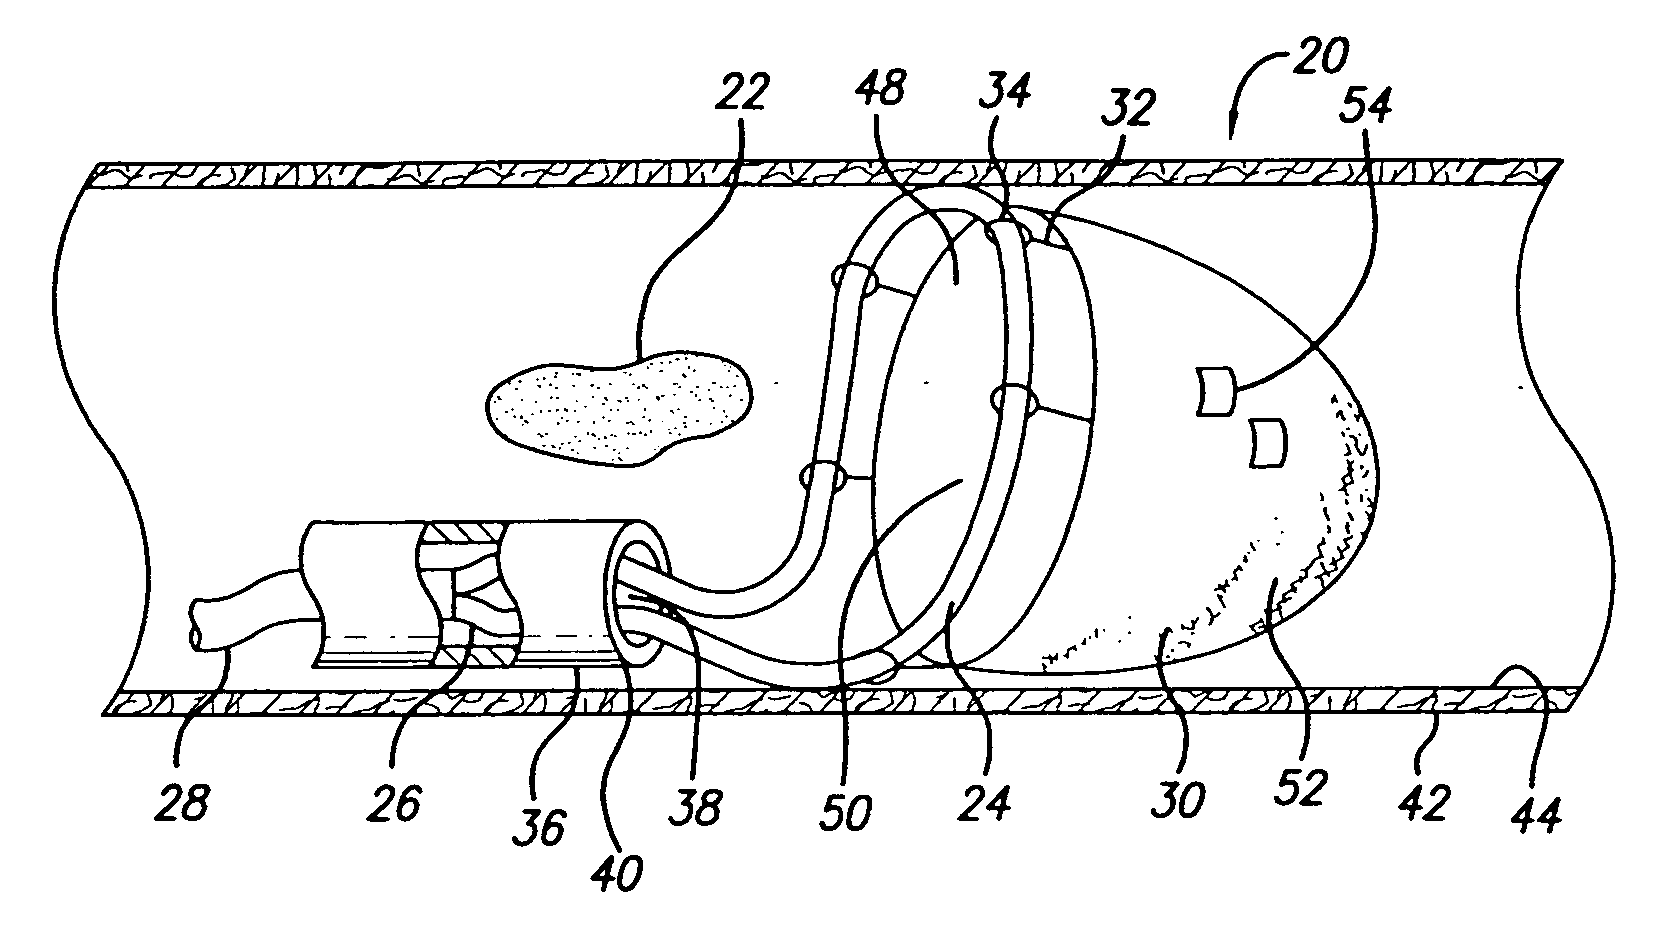 Expandable emboli filter and thrombectomy device